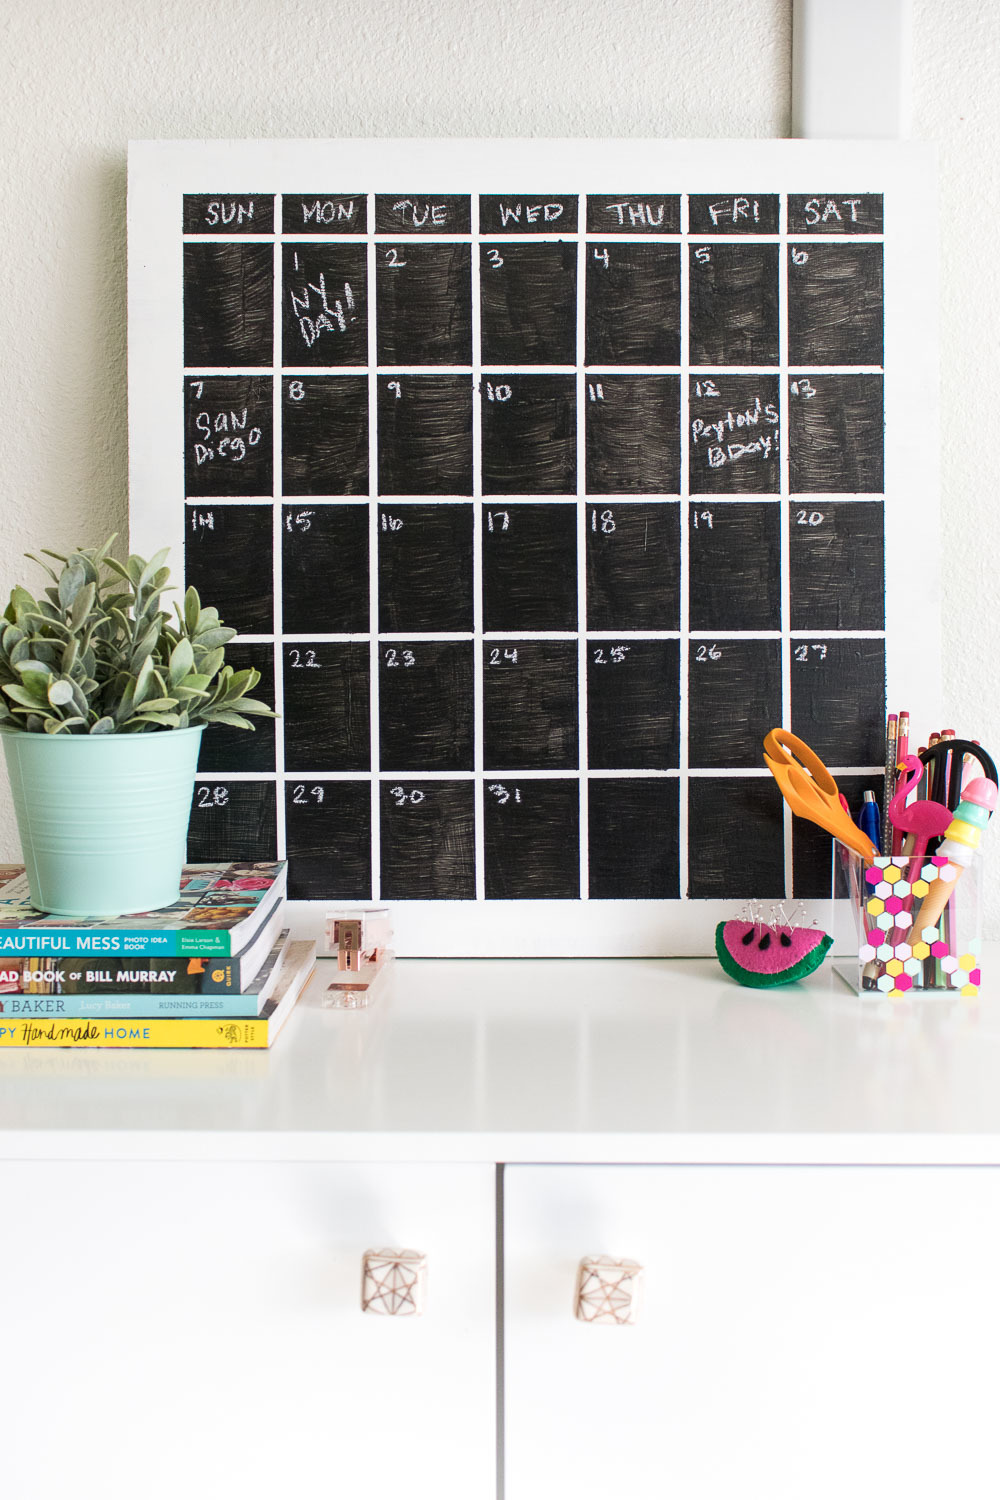 DIY This! A Simple Chalkboard Calendar that Anyone Can Make - Curbly